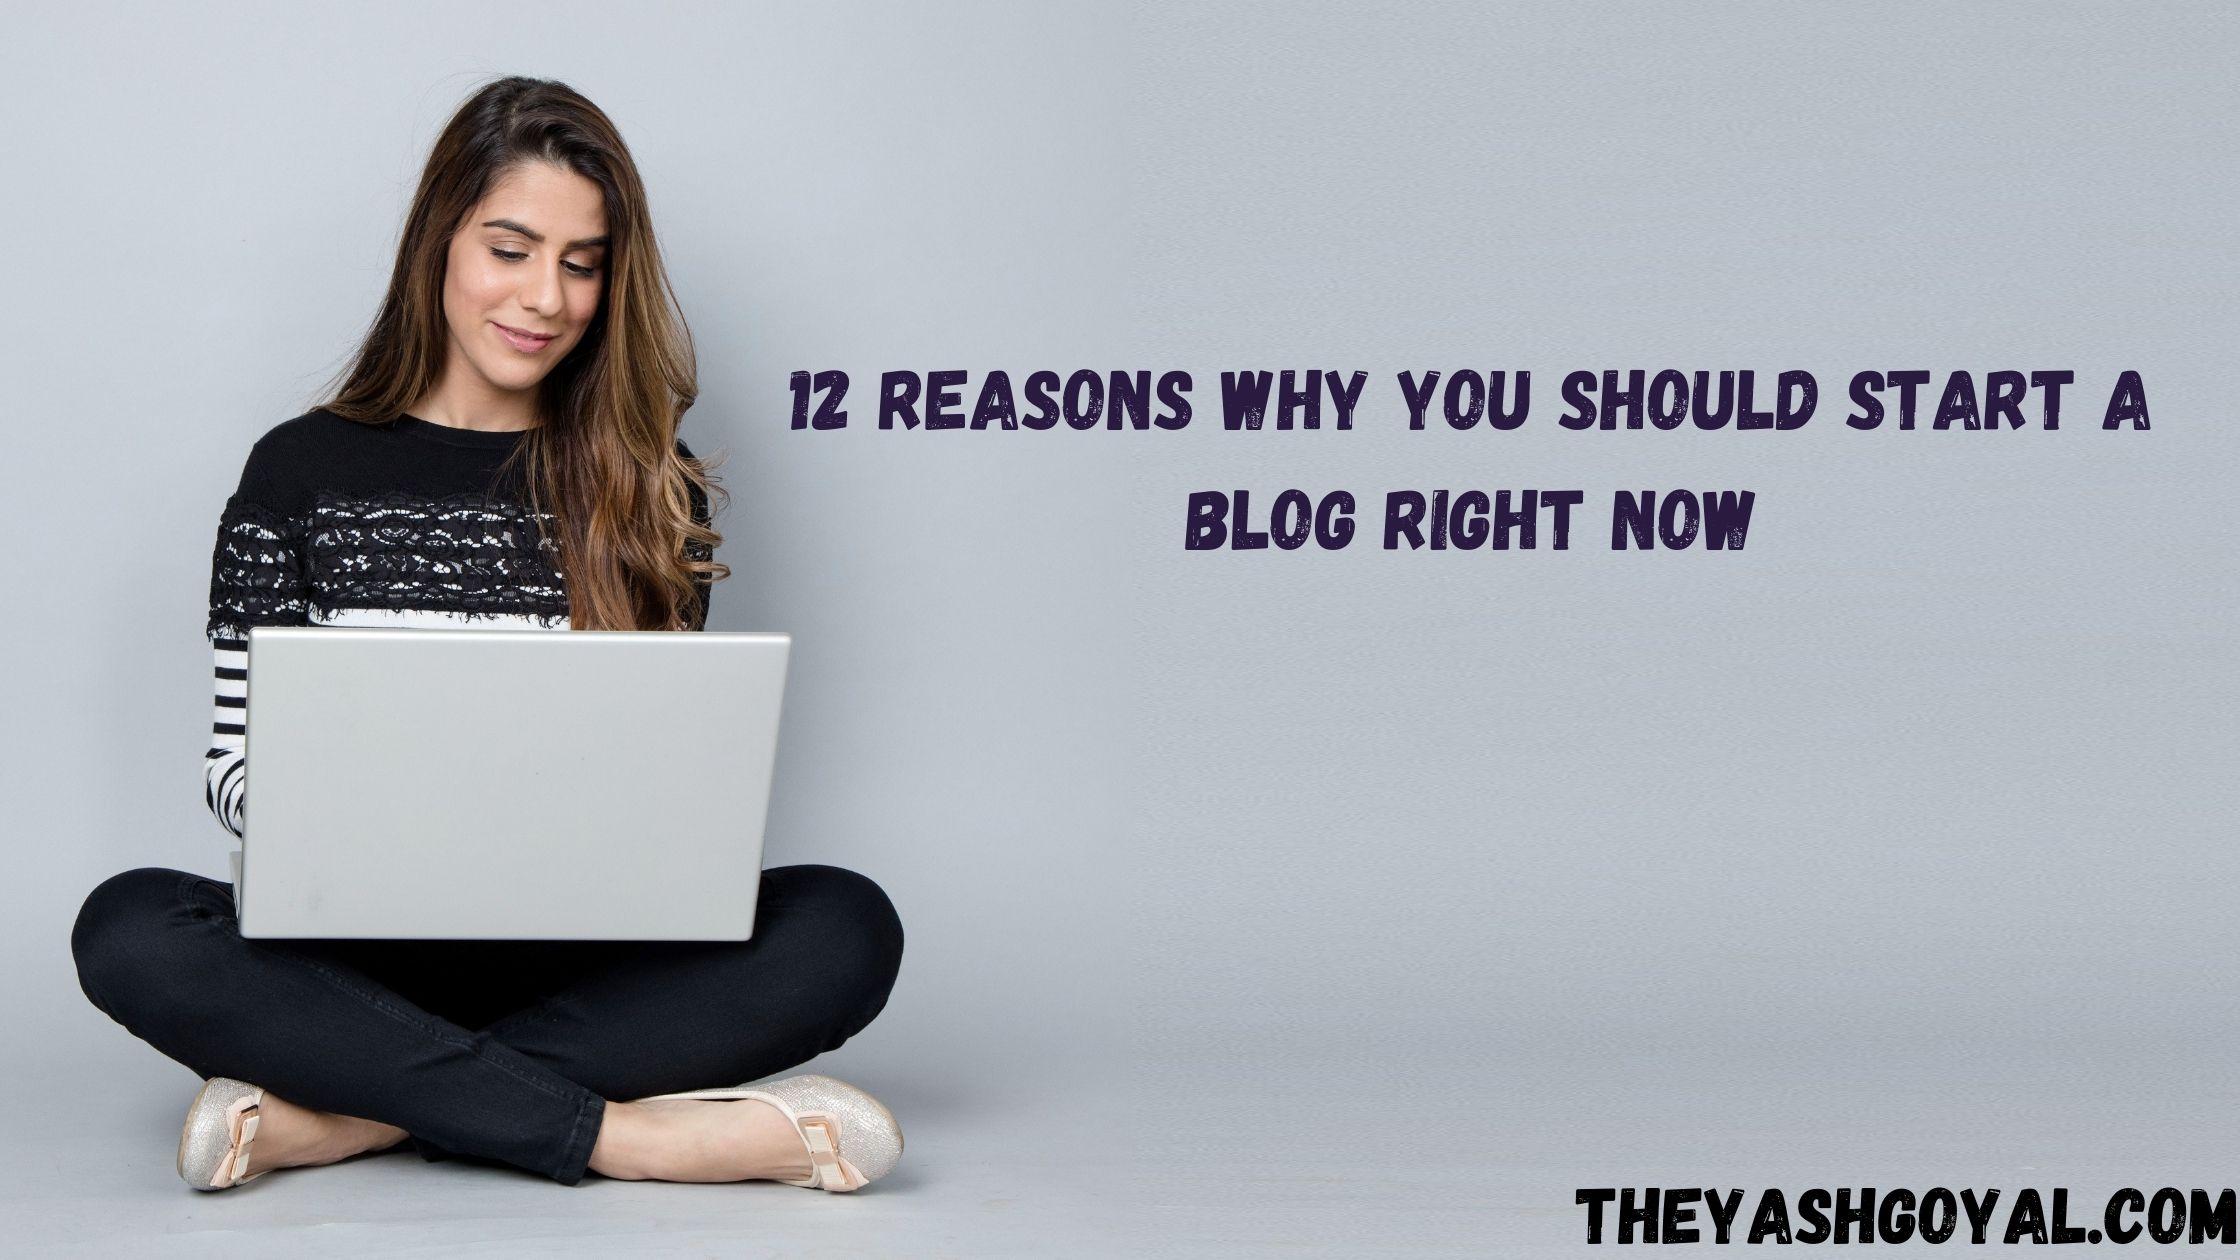 12 reasons why you should start a blog right now